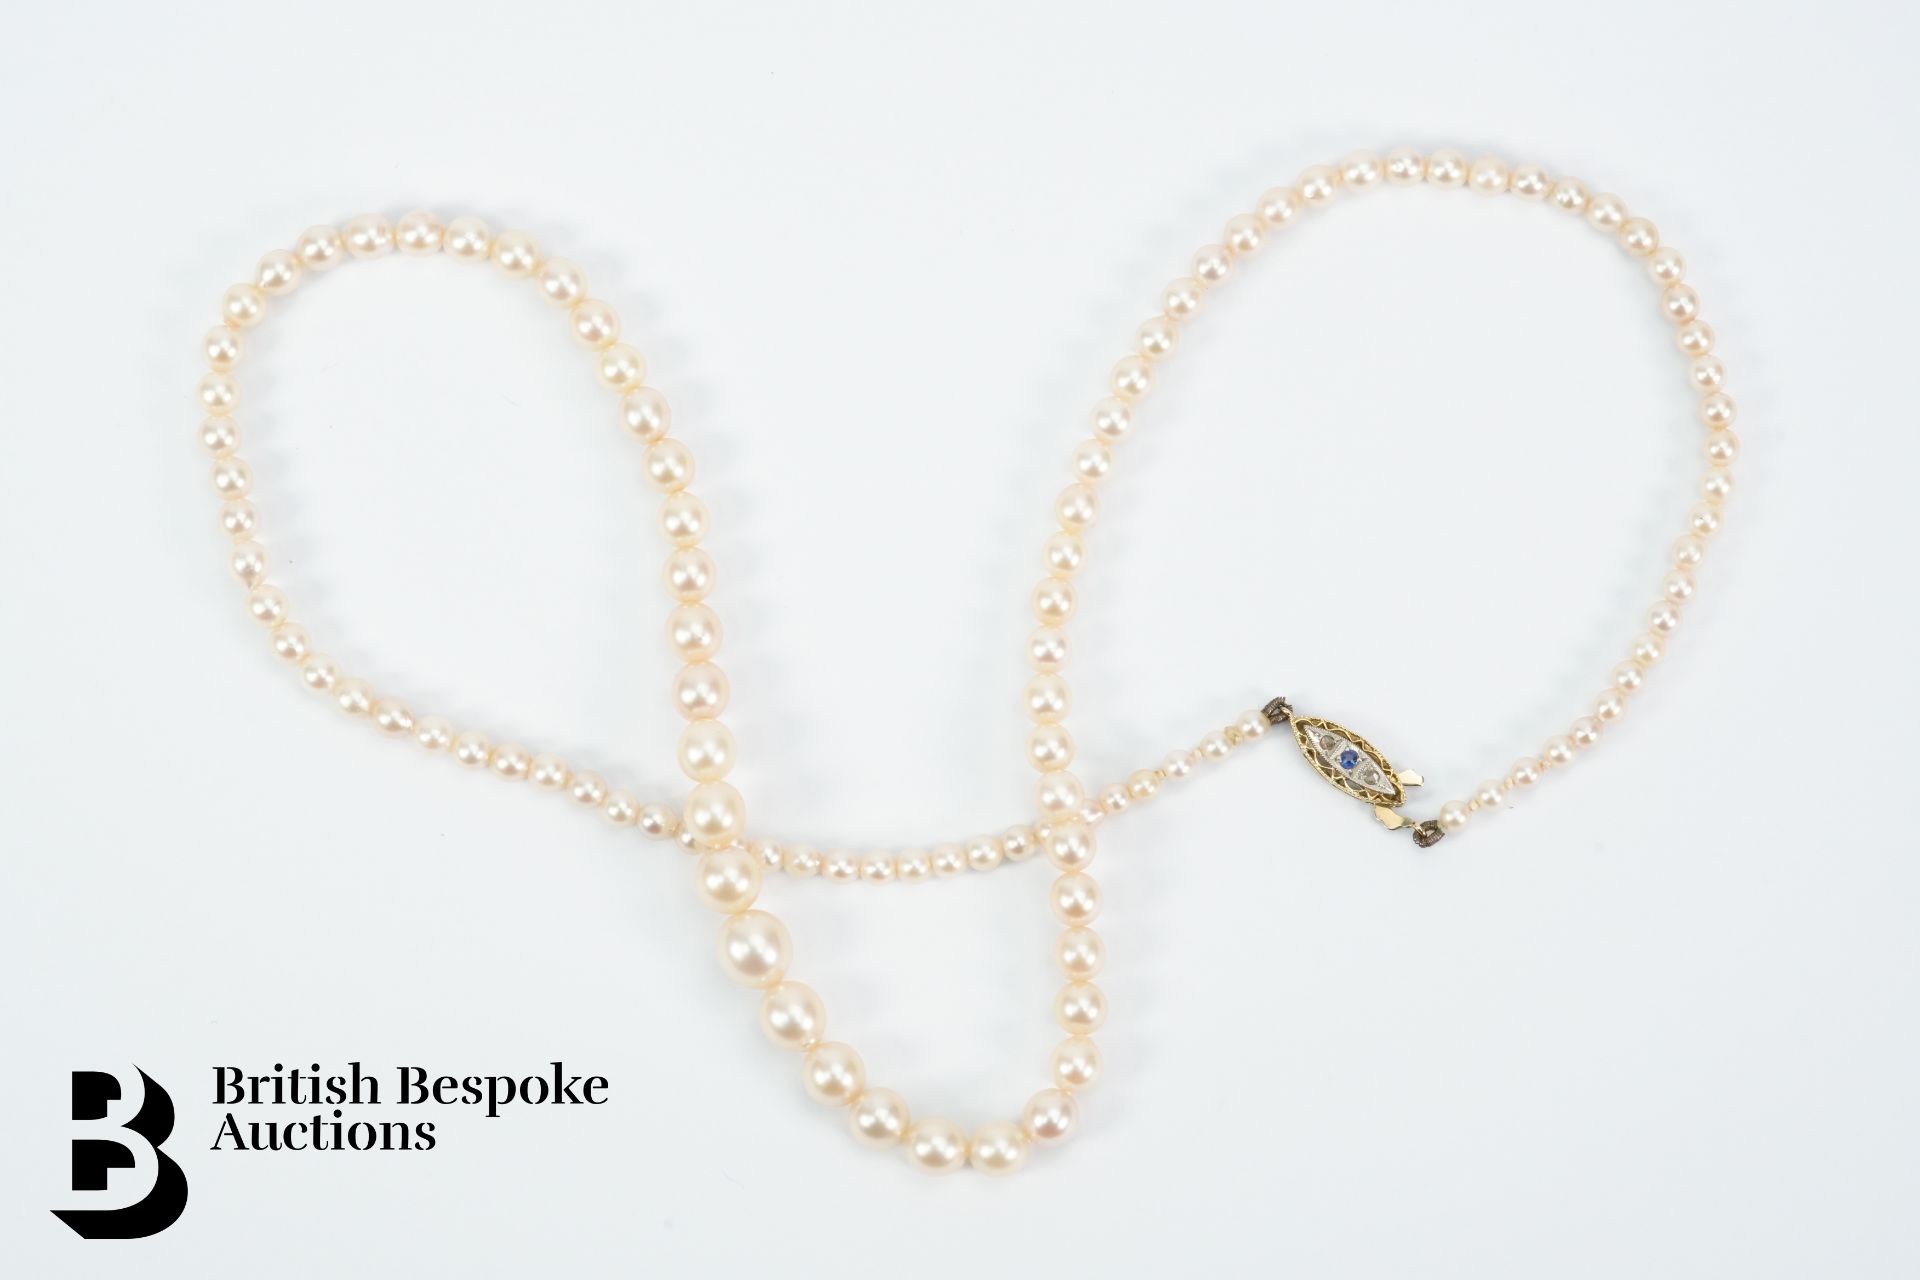 Antique Single Strand of Pearls - Image 7 of 7